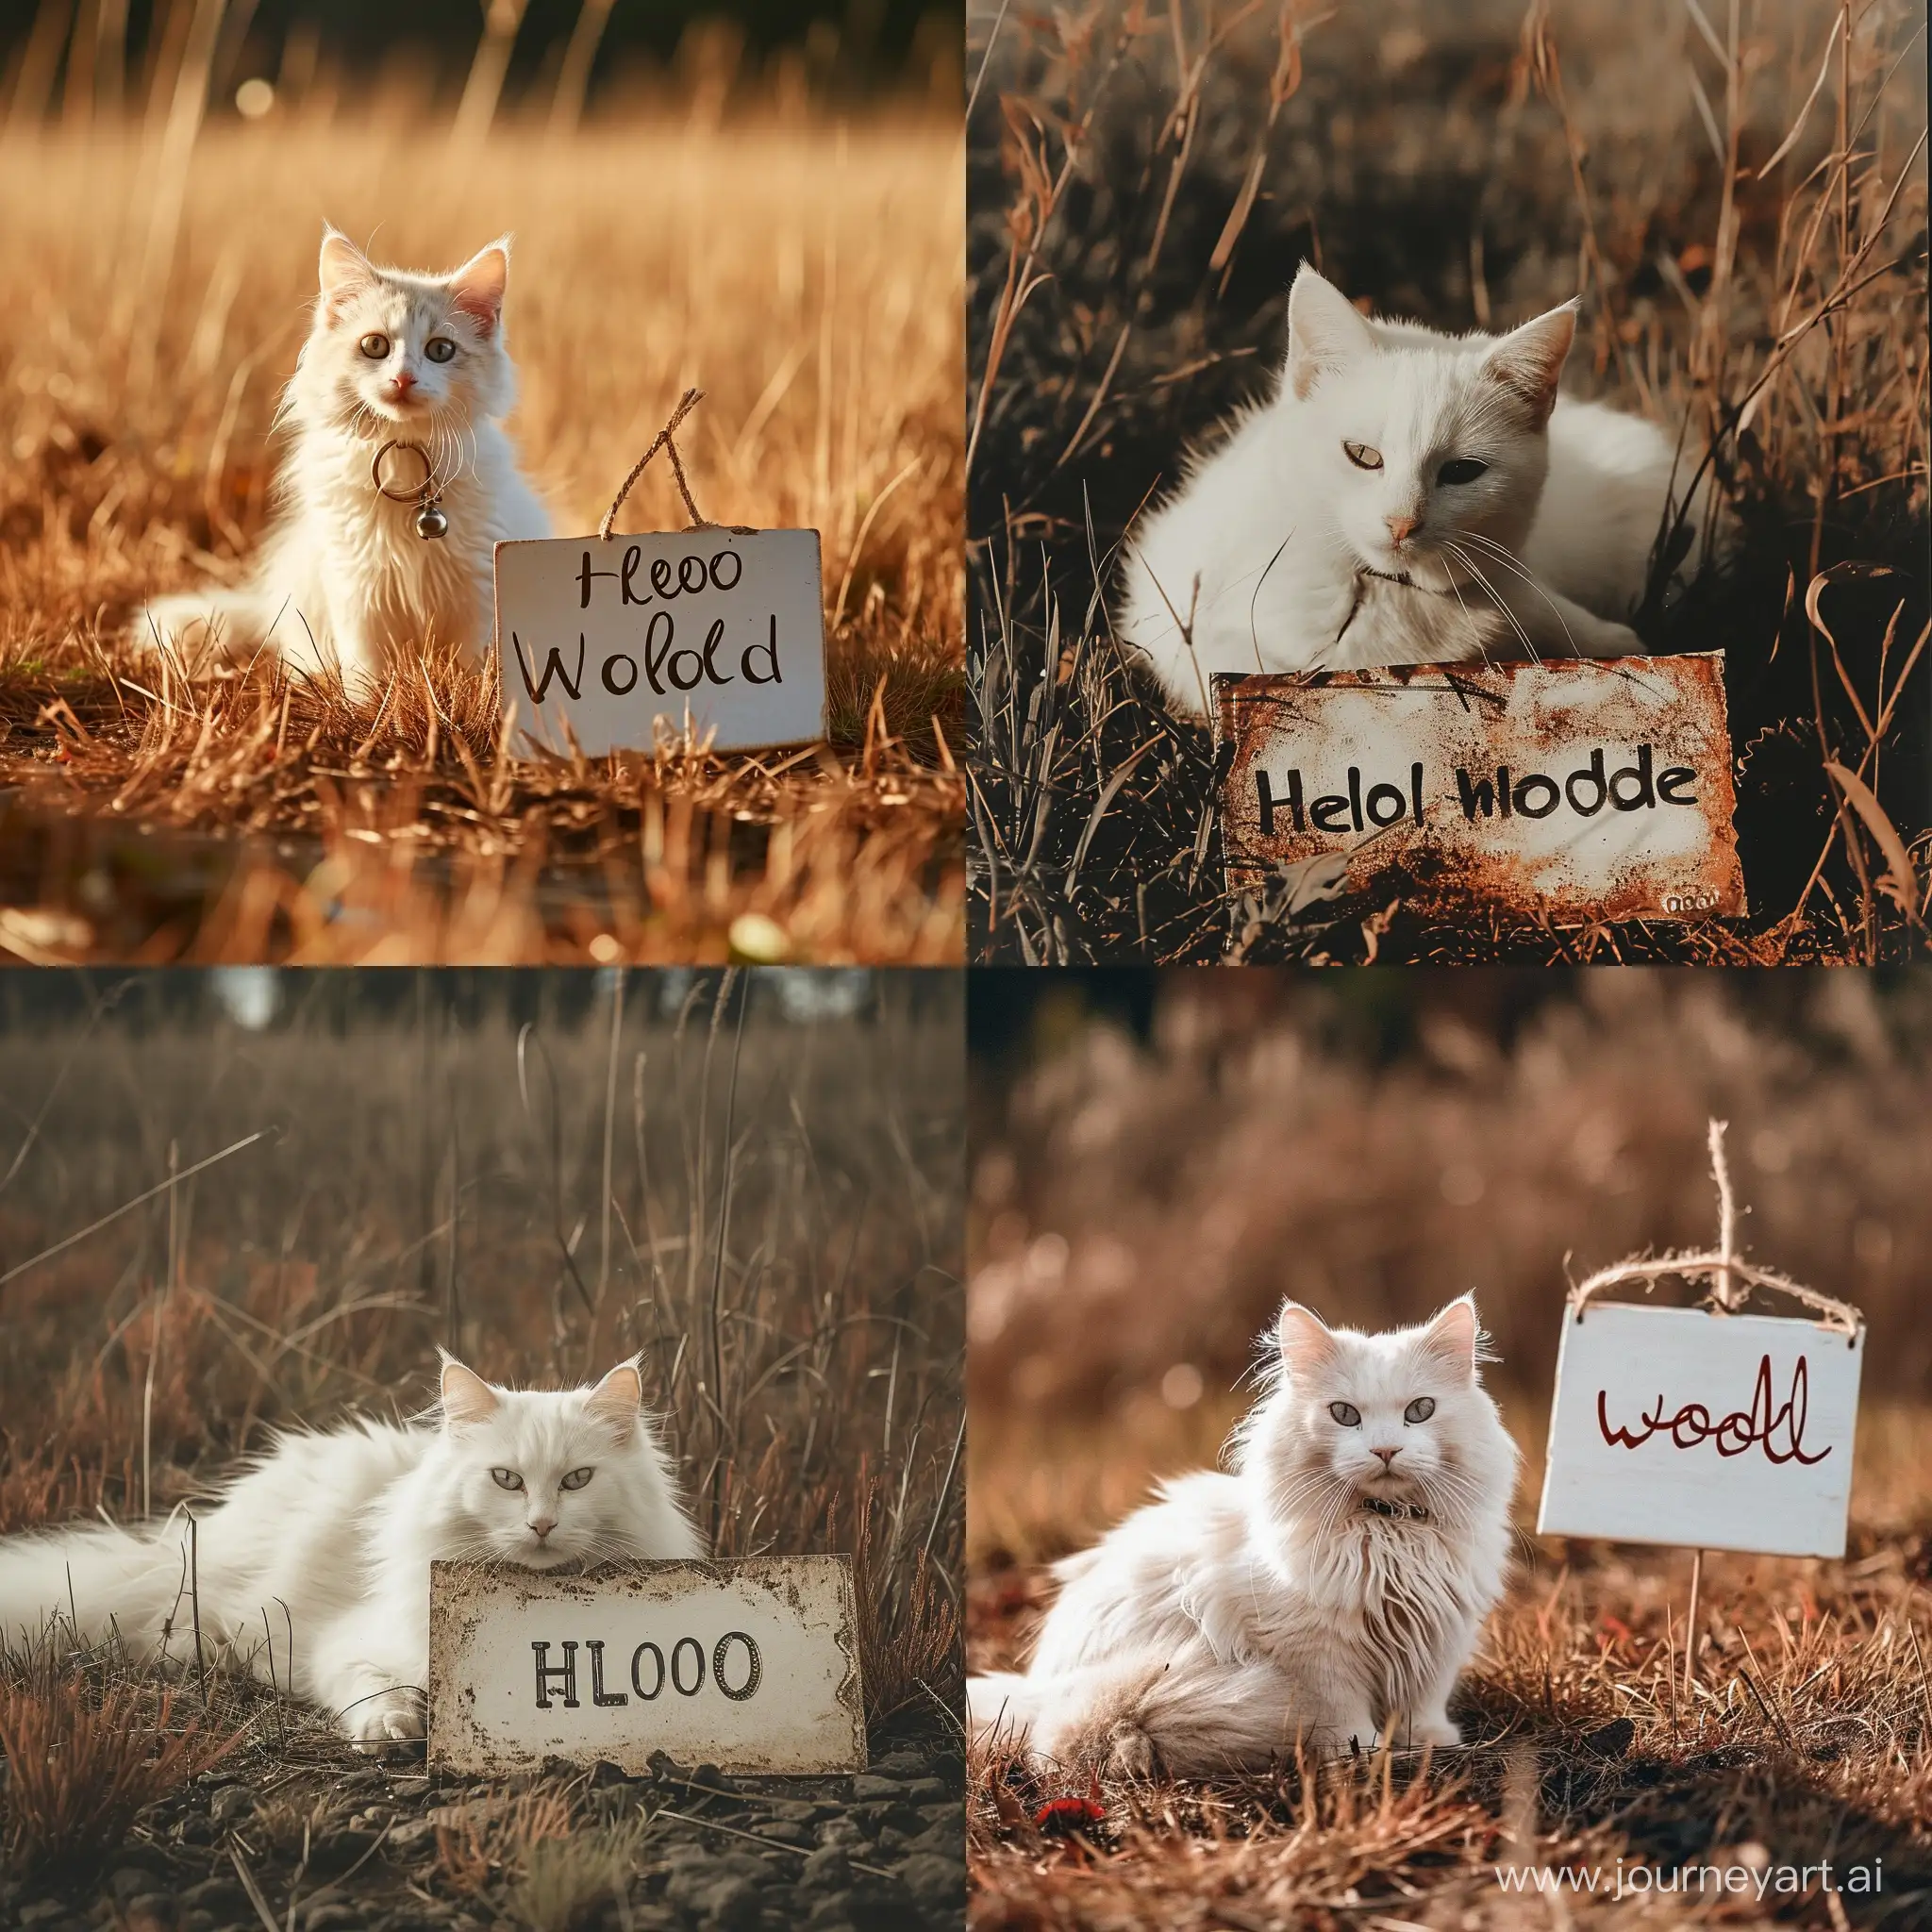 Adorable-White-Cat-Greeting-the-World-in-a-Field